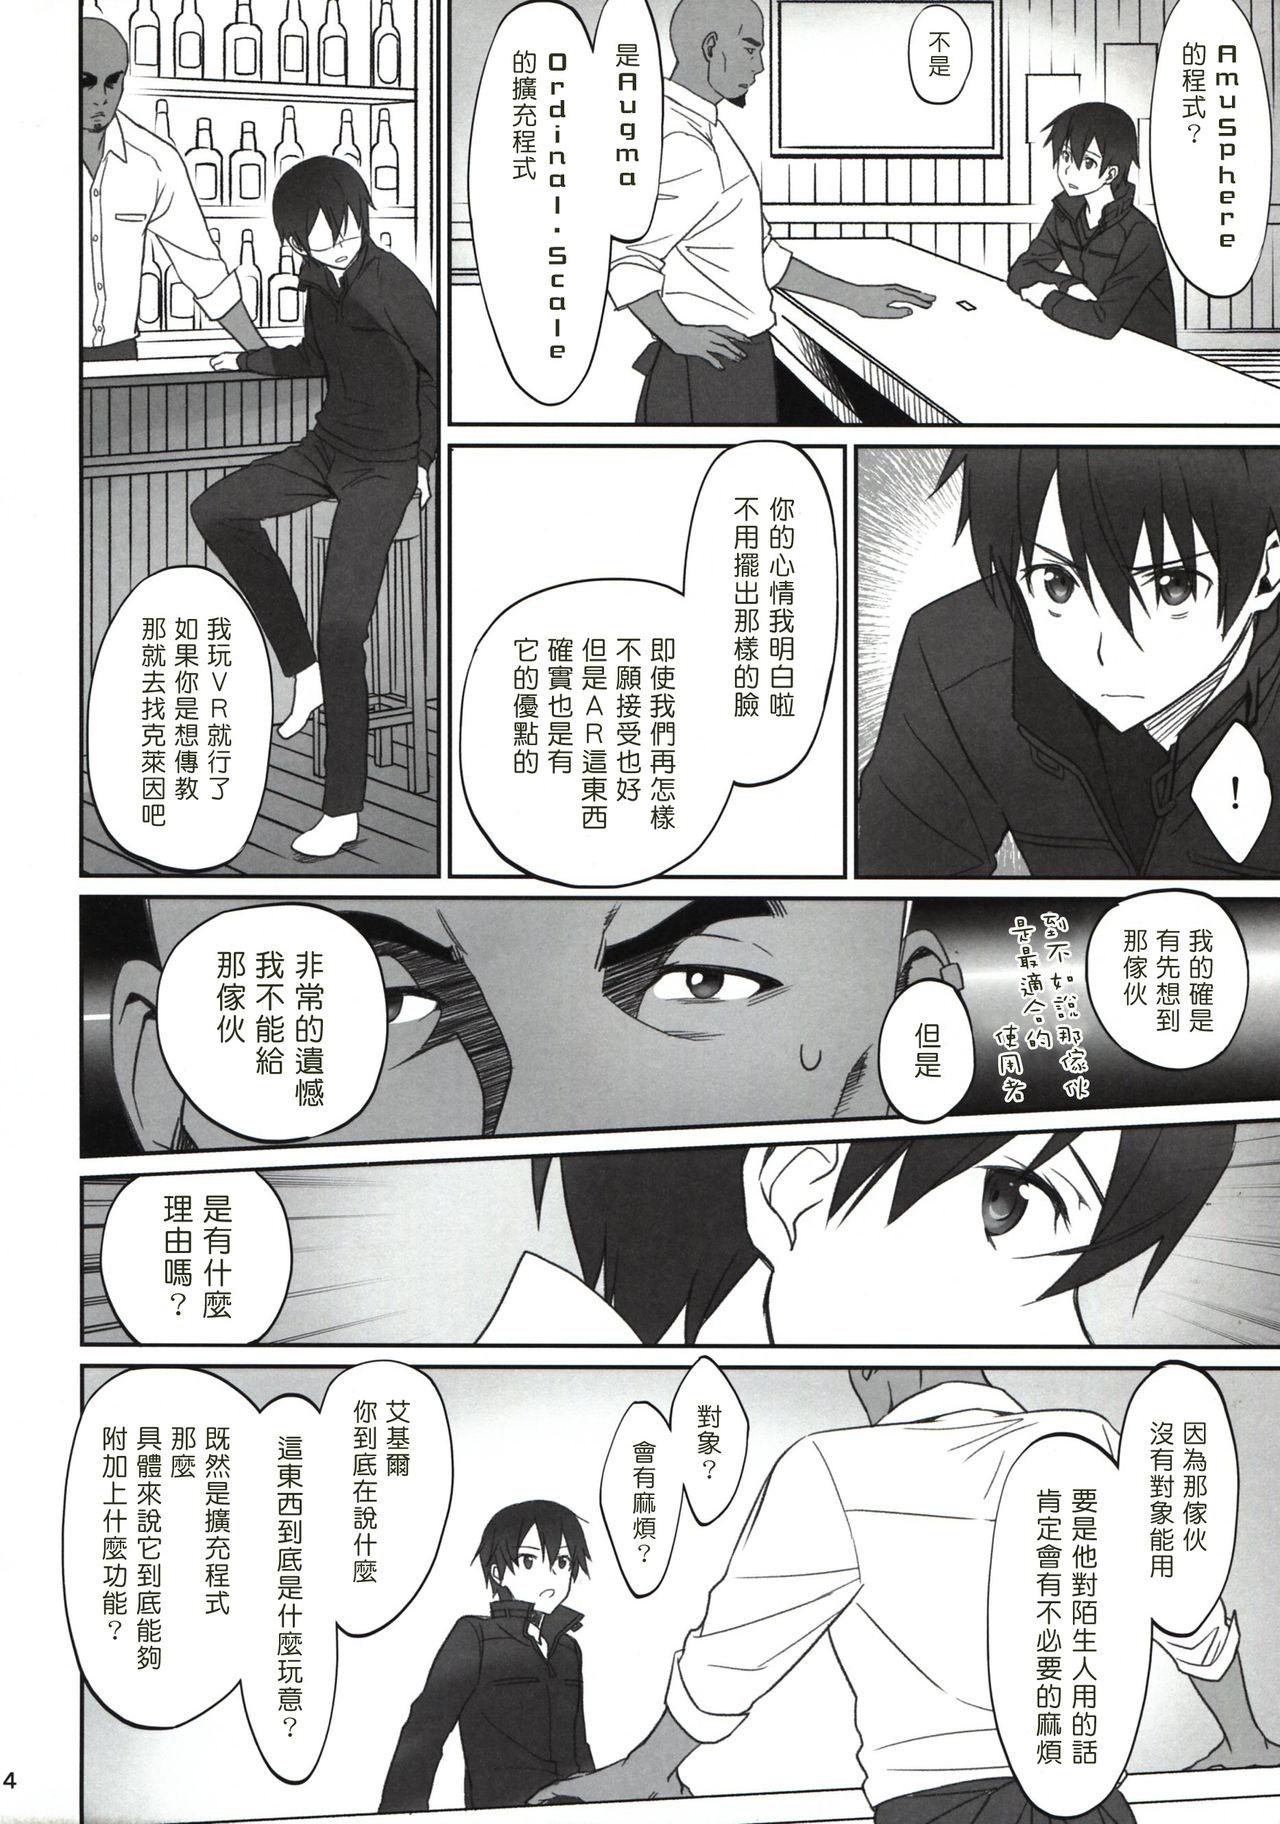 Amature Allure Voyeuristic Disorder - Sword art online Gay Ass Fucking - Page 4